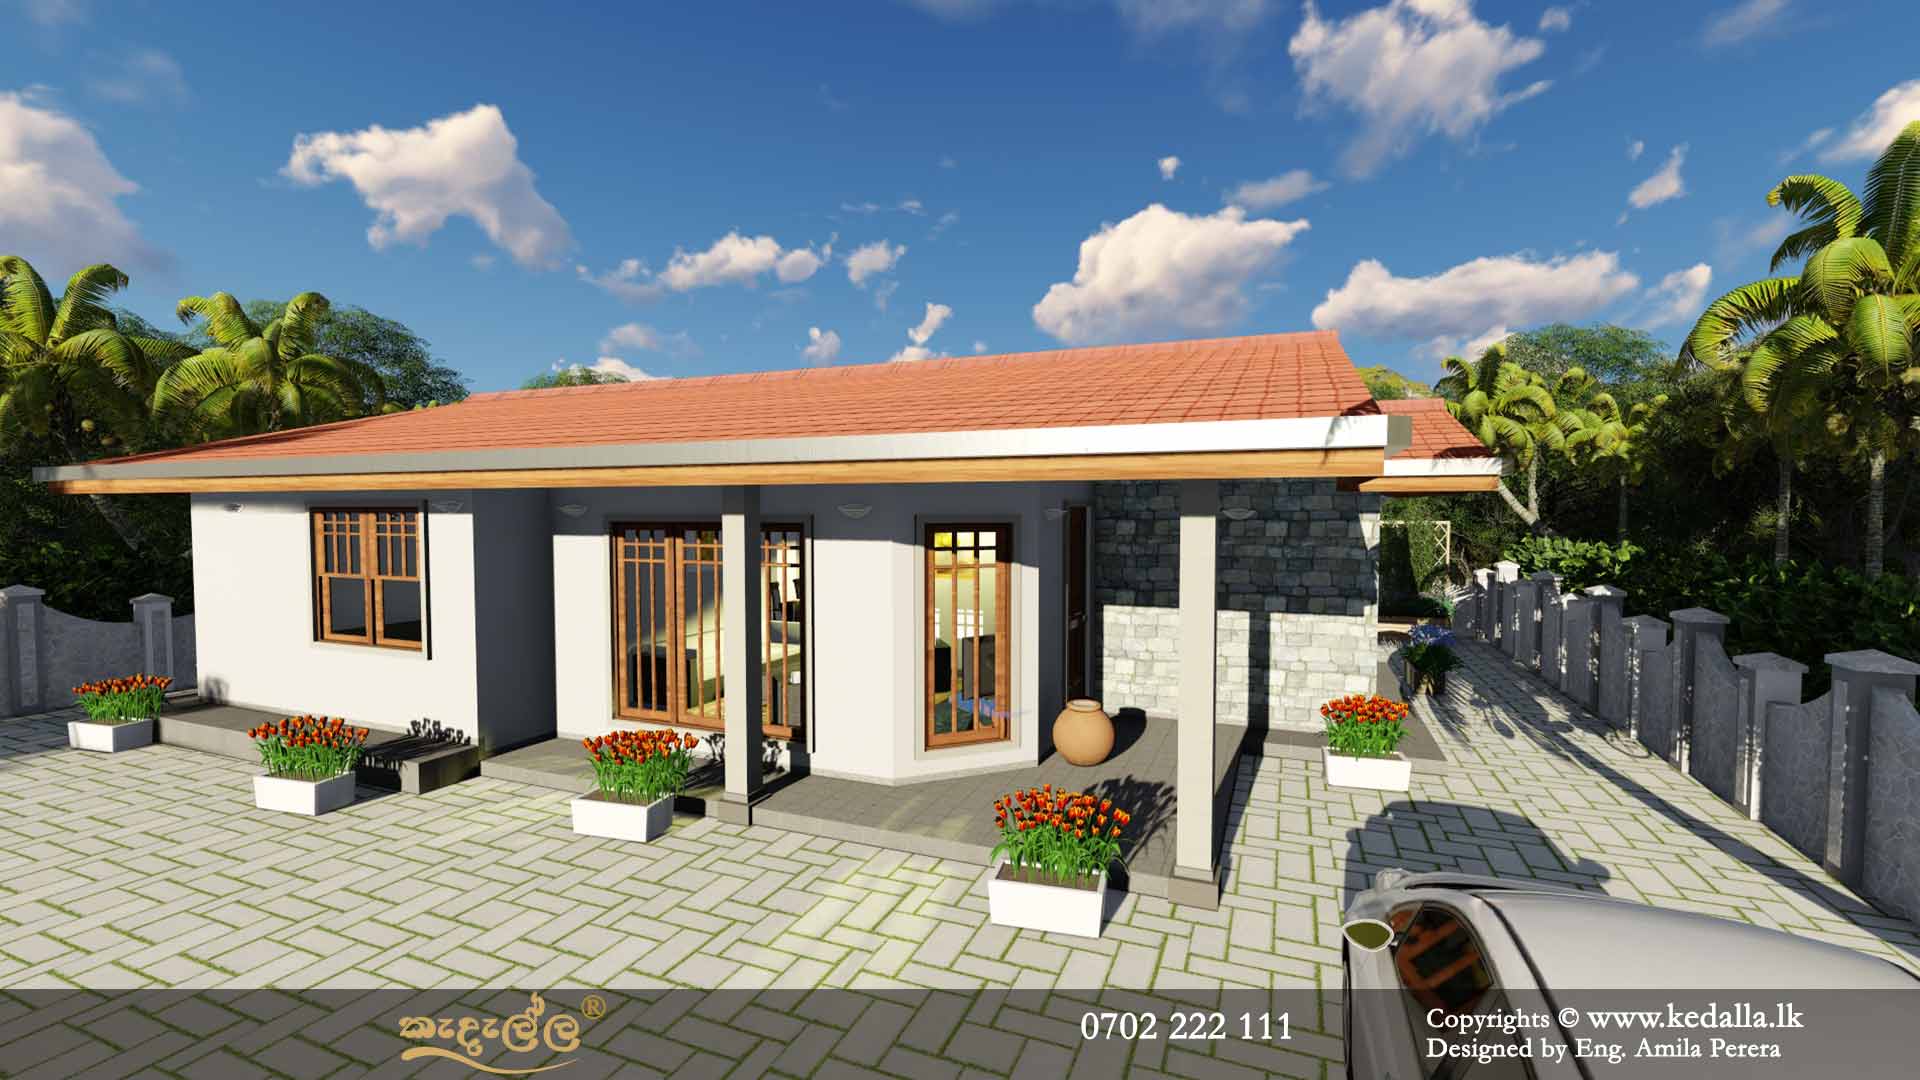 4 Bedroom Single Story House Plans in Sri Lanka - Designed by archtects in Colombo